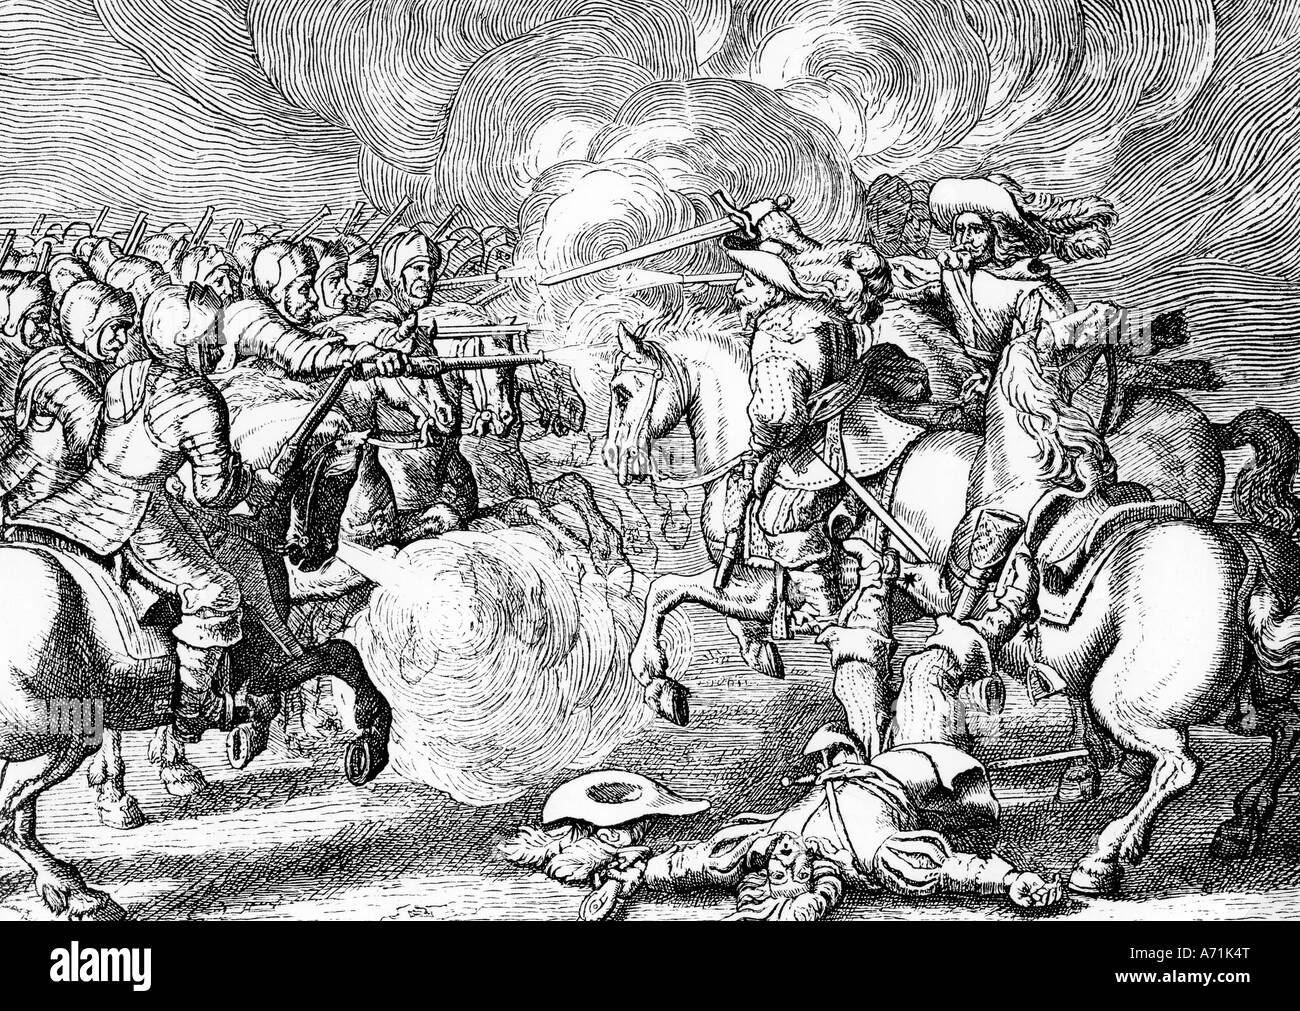 events, Thirty Years War 1618 - 1648, Swedish intervention 1630 - 1635, Battle of Lützen 16.11.1632, death of King Gustavus Adolphus of Sweden, contemporary engraving, cavalry fight, Saxony, Germany, 17th century, historic, historical, Wasa, people, Stock Photo